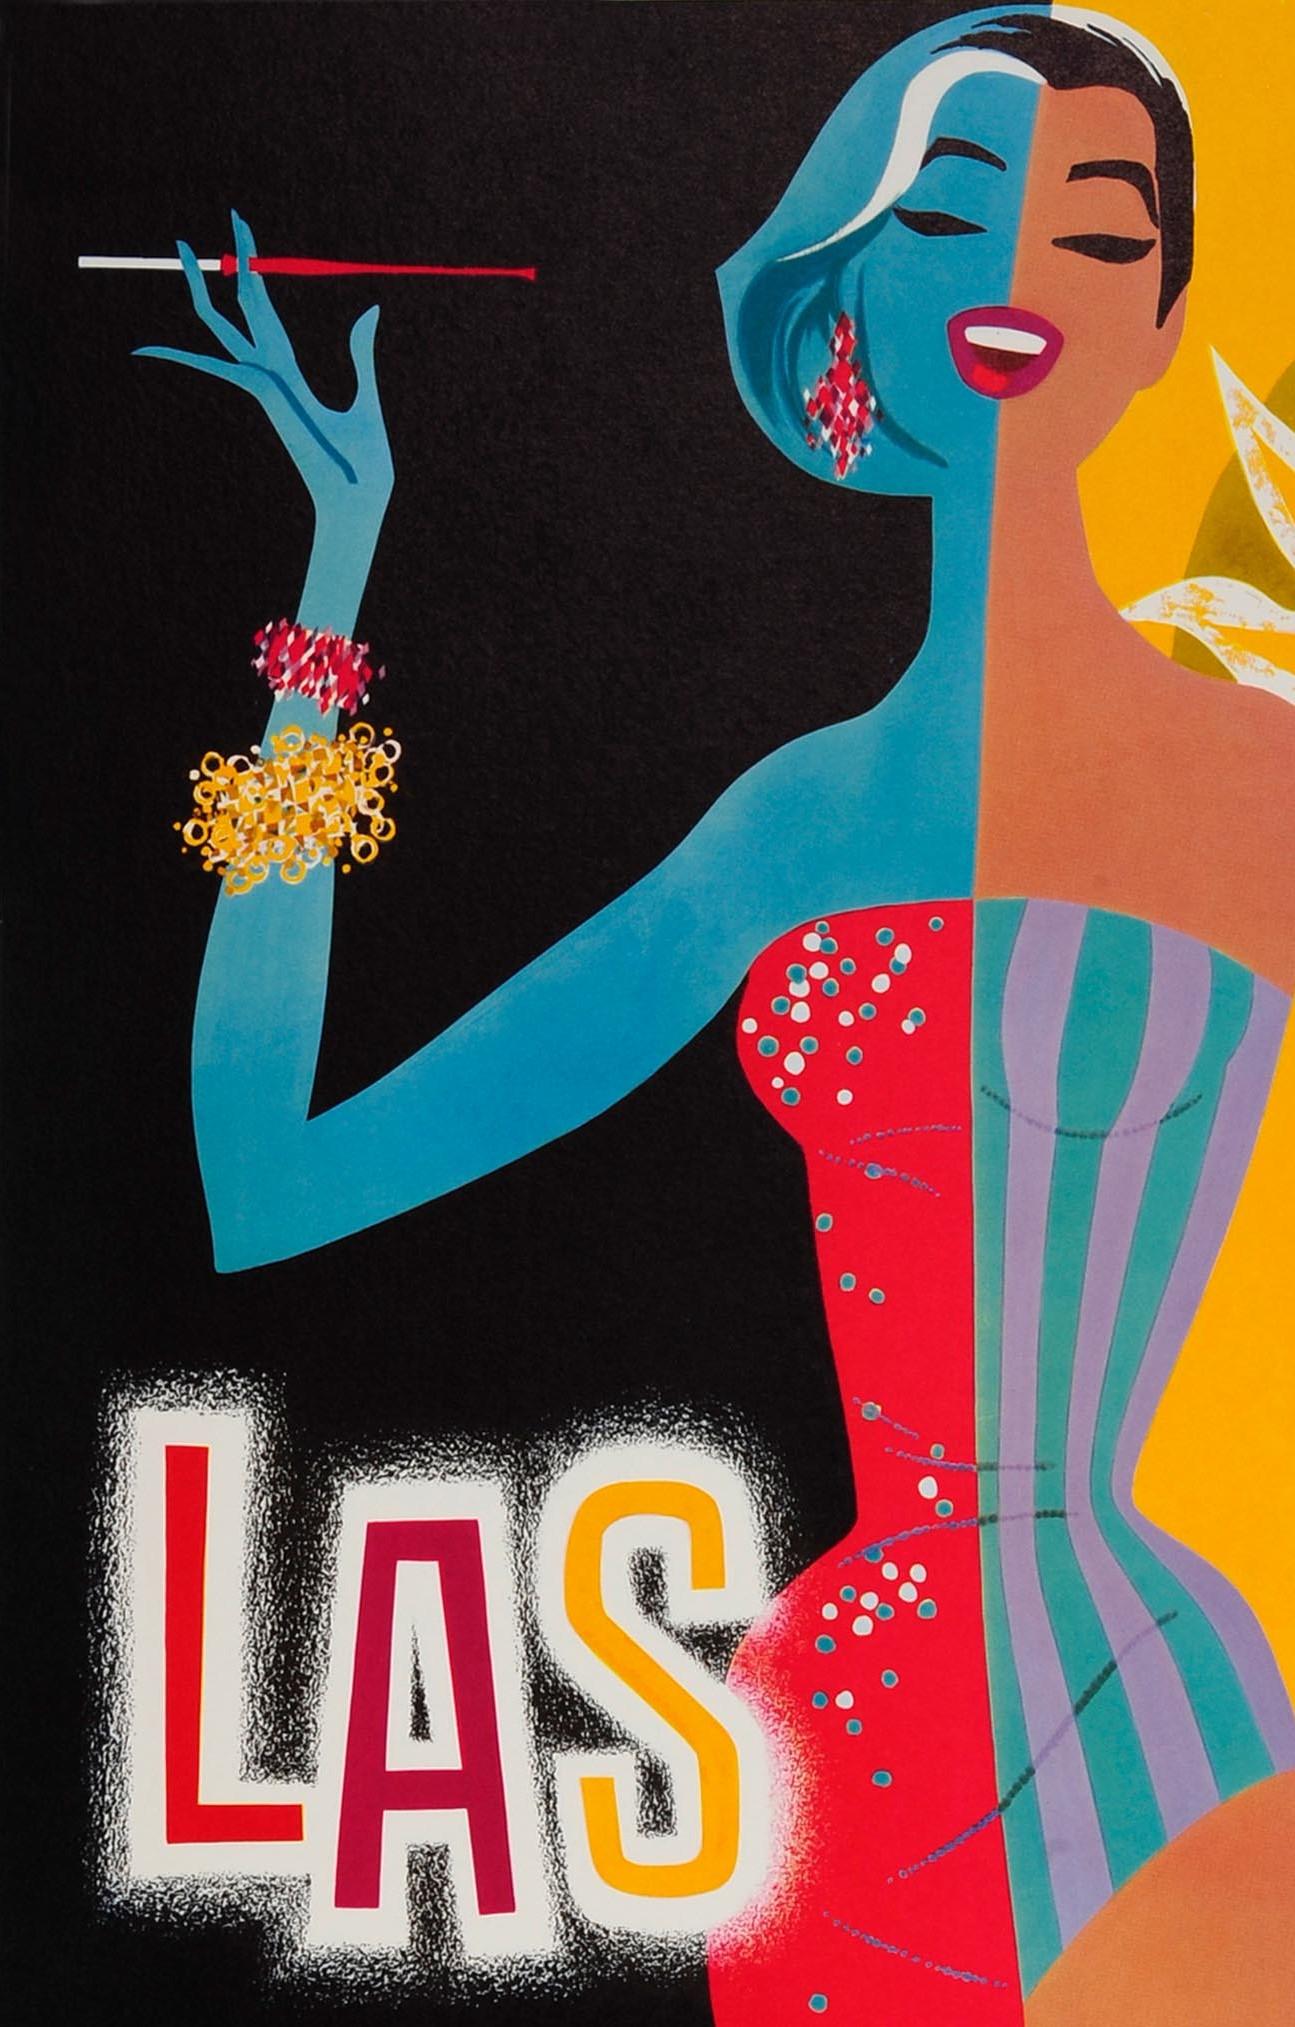 Original vintage mid century airline travel poster advertising Las Vegas by TWA Trans World Airlines. Colorful image by the notable American artist David Klein (1918-2005) featuring a smiling elegant lady enjoying Las Vegas at night and day with her